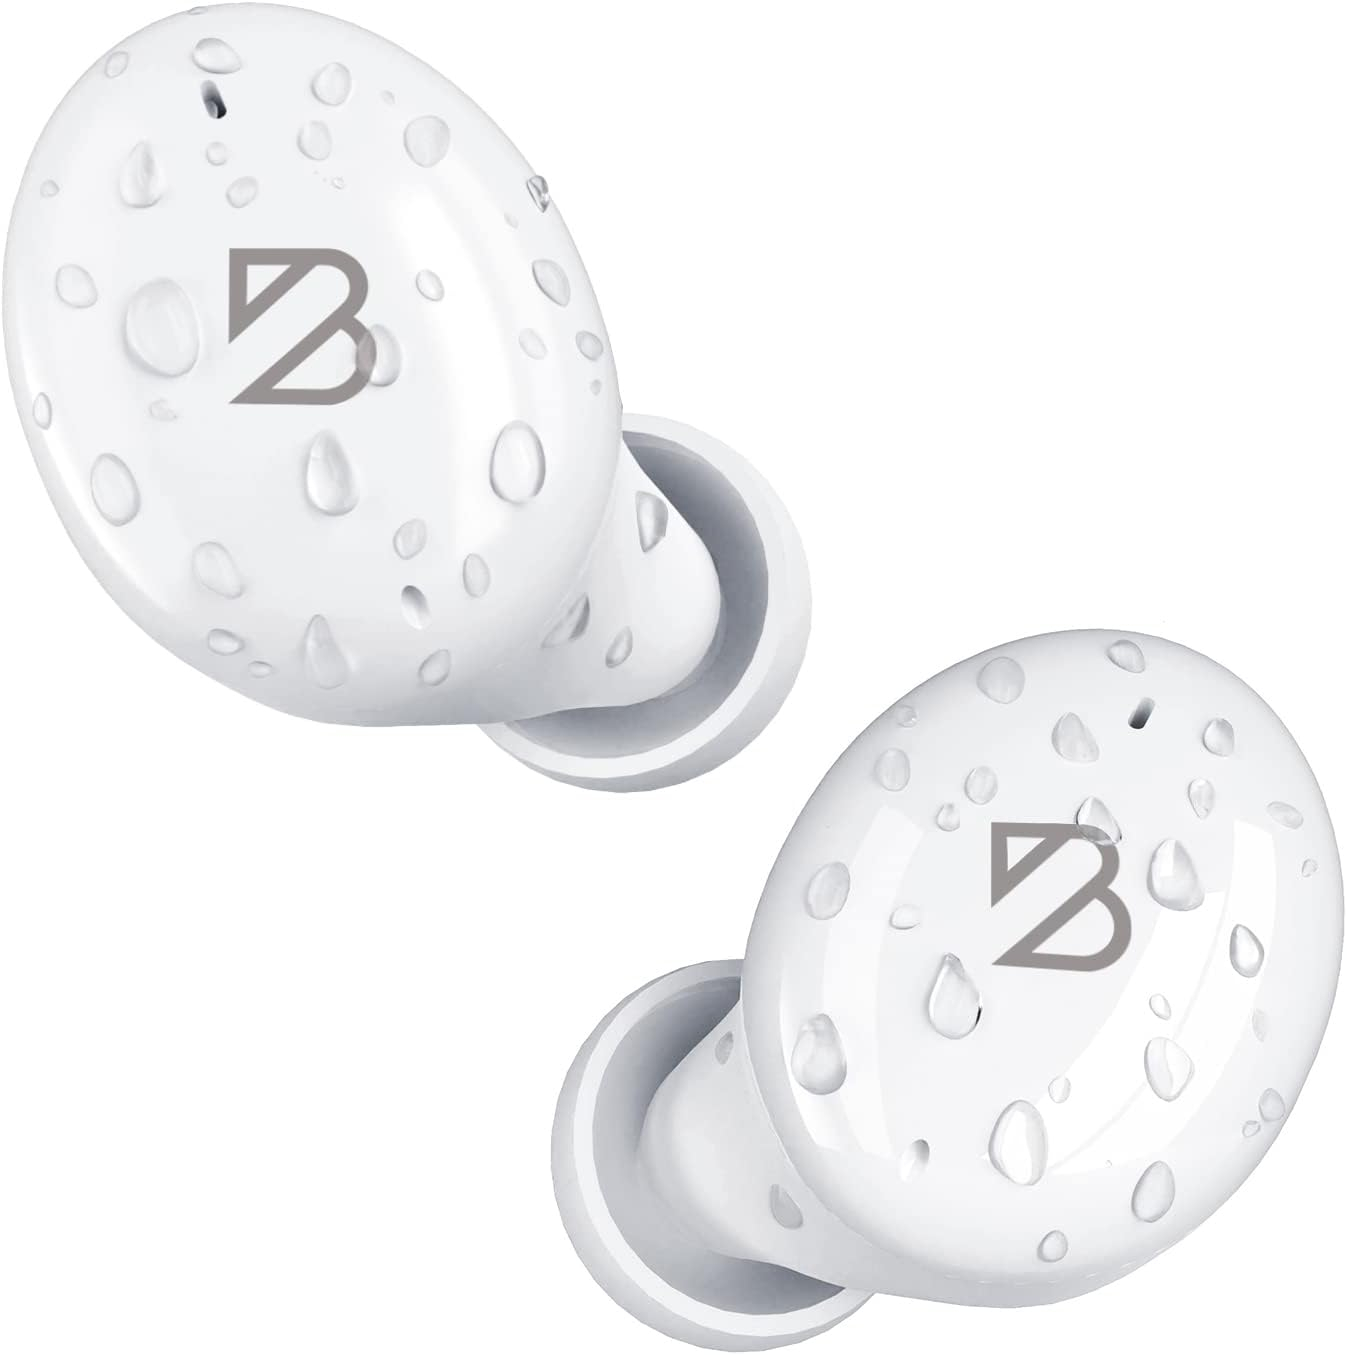 Back Bay Audio Tempo 30 White Wireless Earbud Stereo in-Ear Monitors, White Earbuds for Small Ear Canals, Wireless Recording IEM Earphones for Musicians, Loud Studio Sound